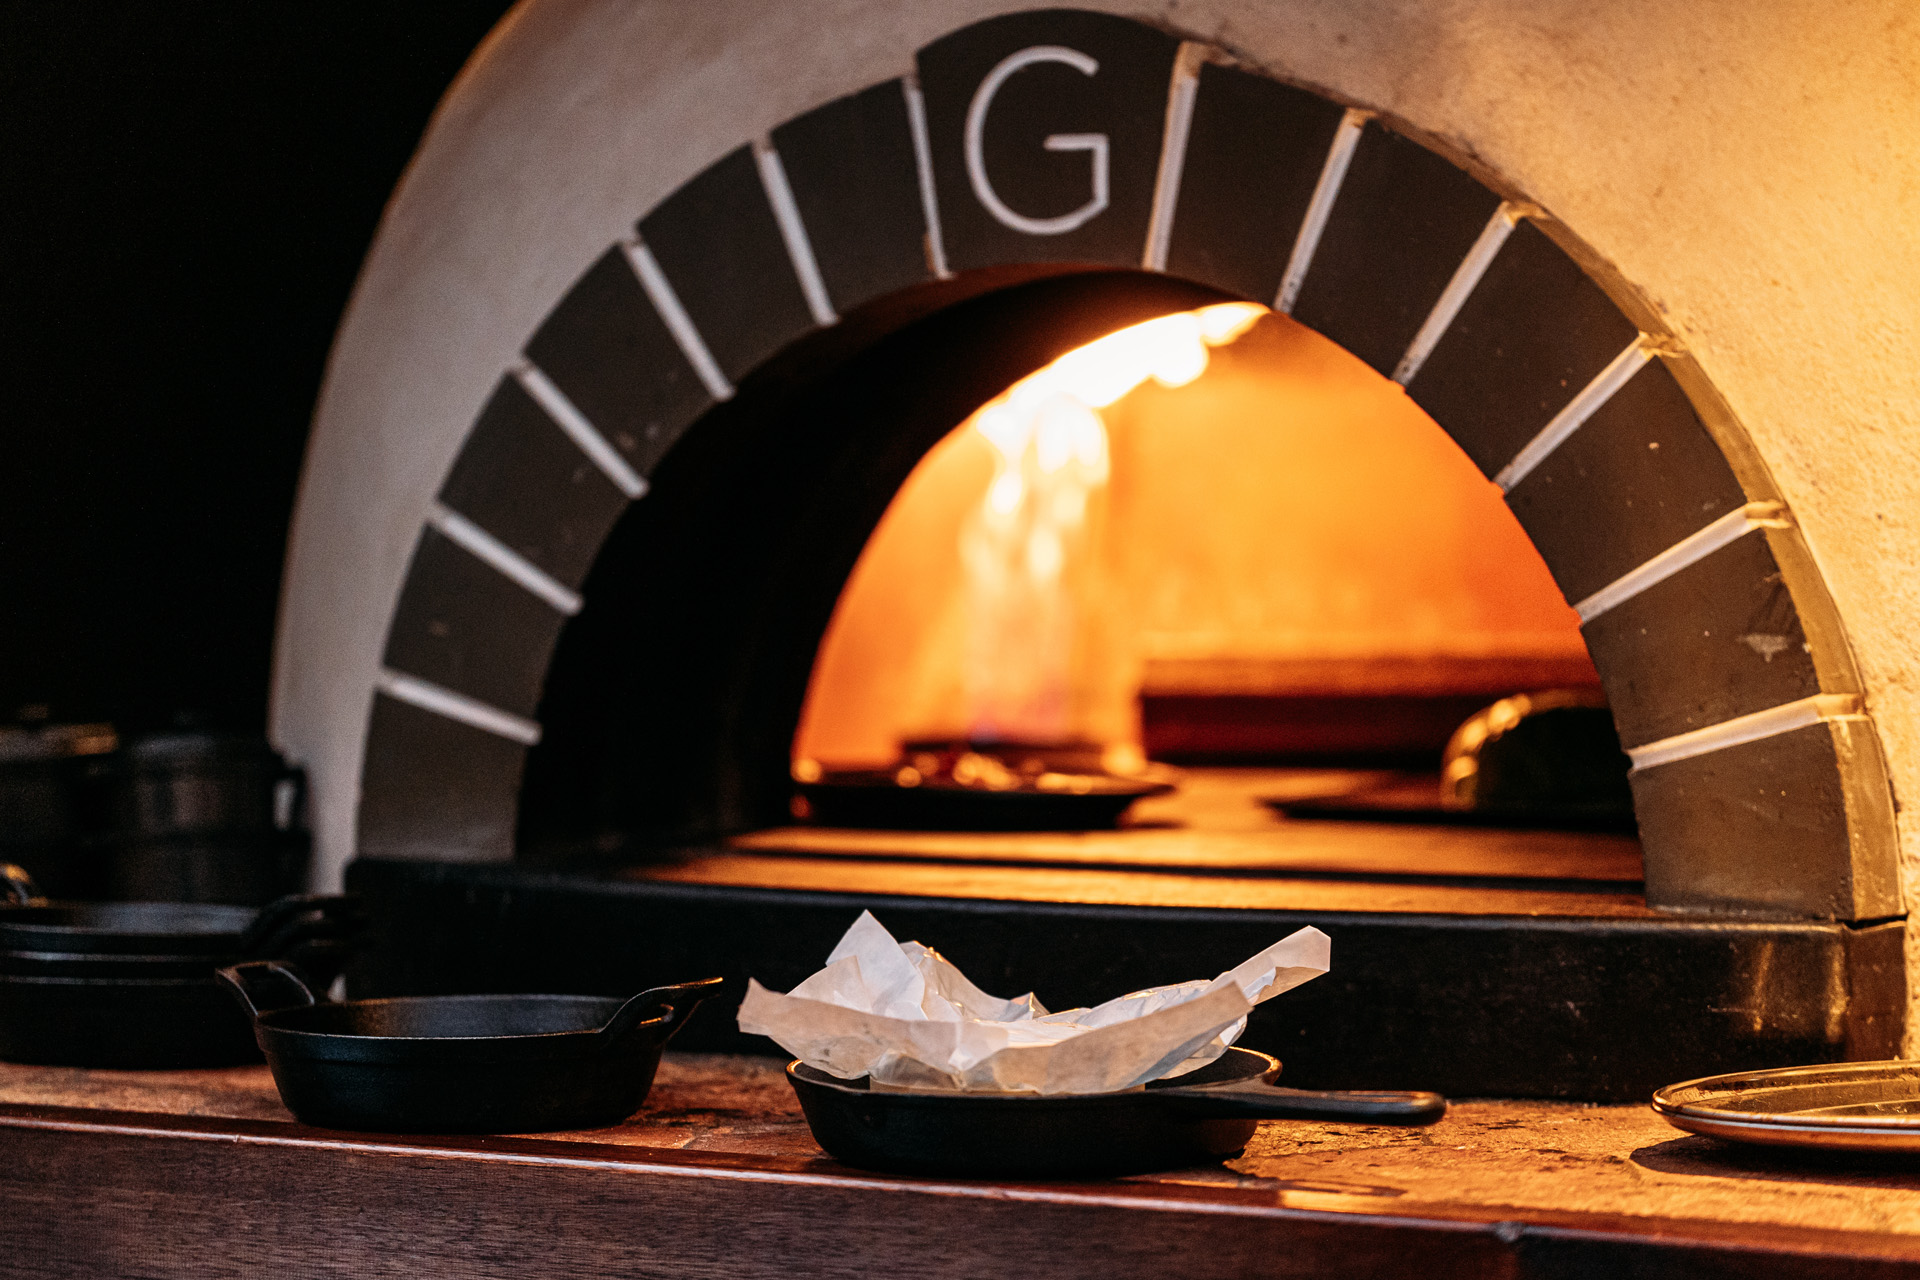 The wood-fired oven